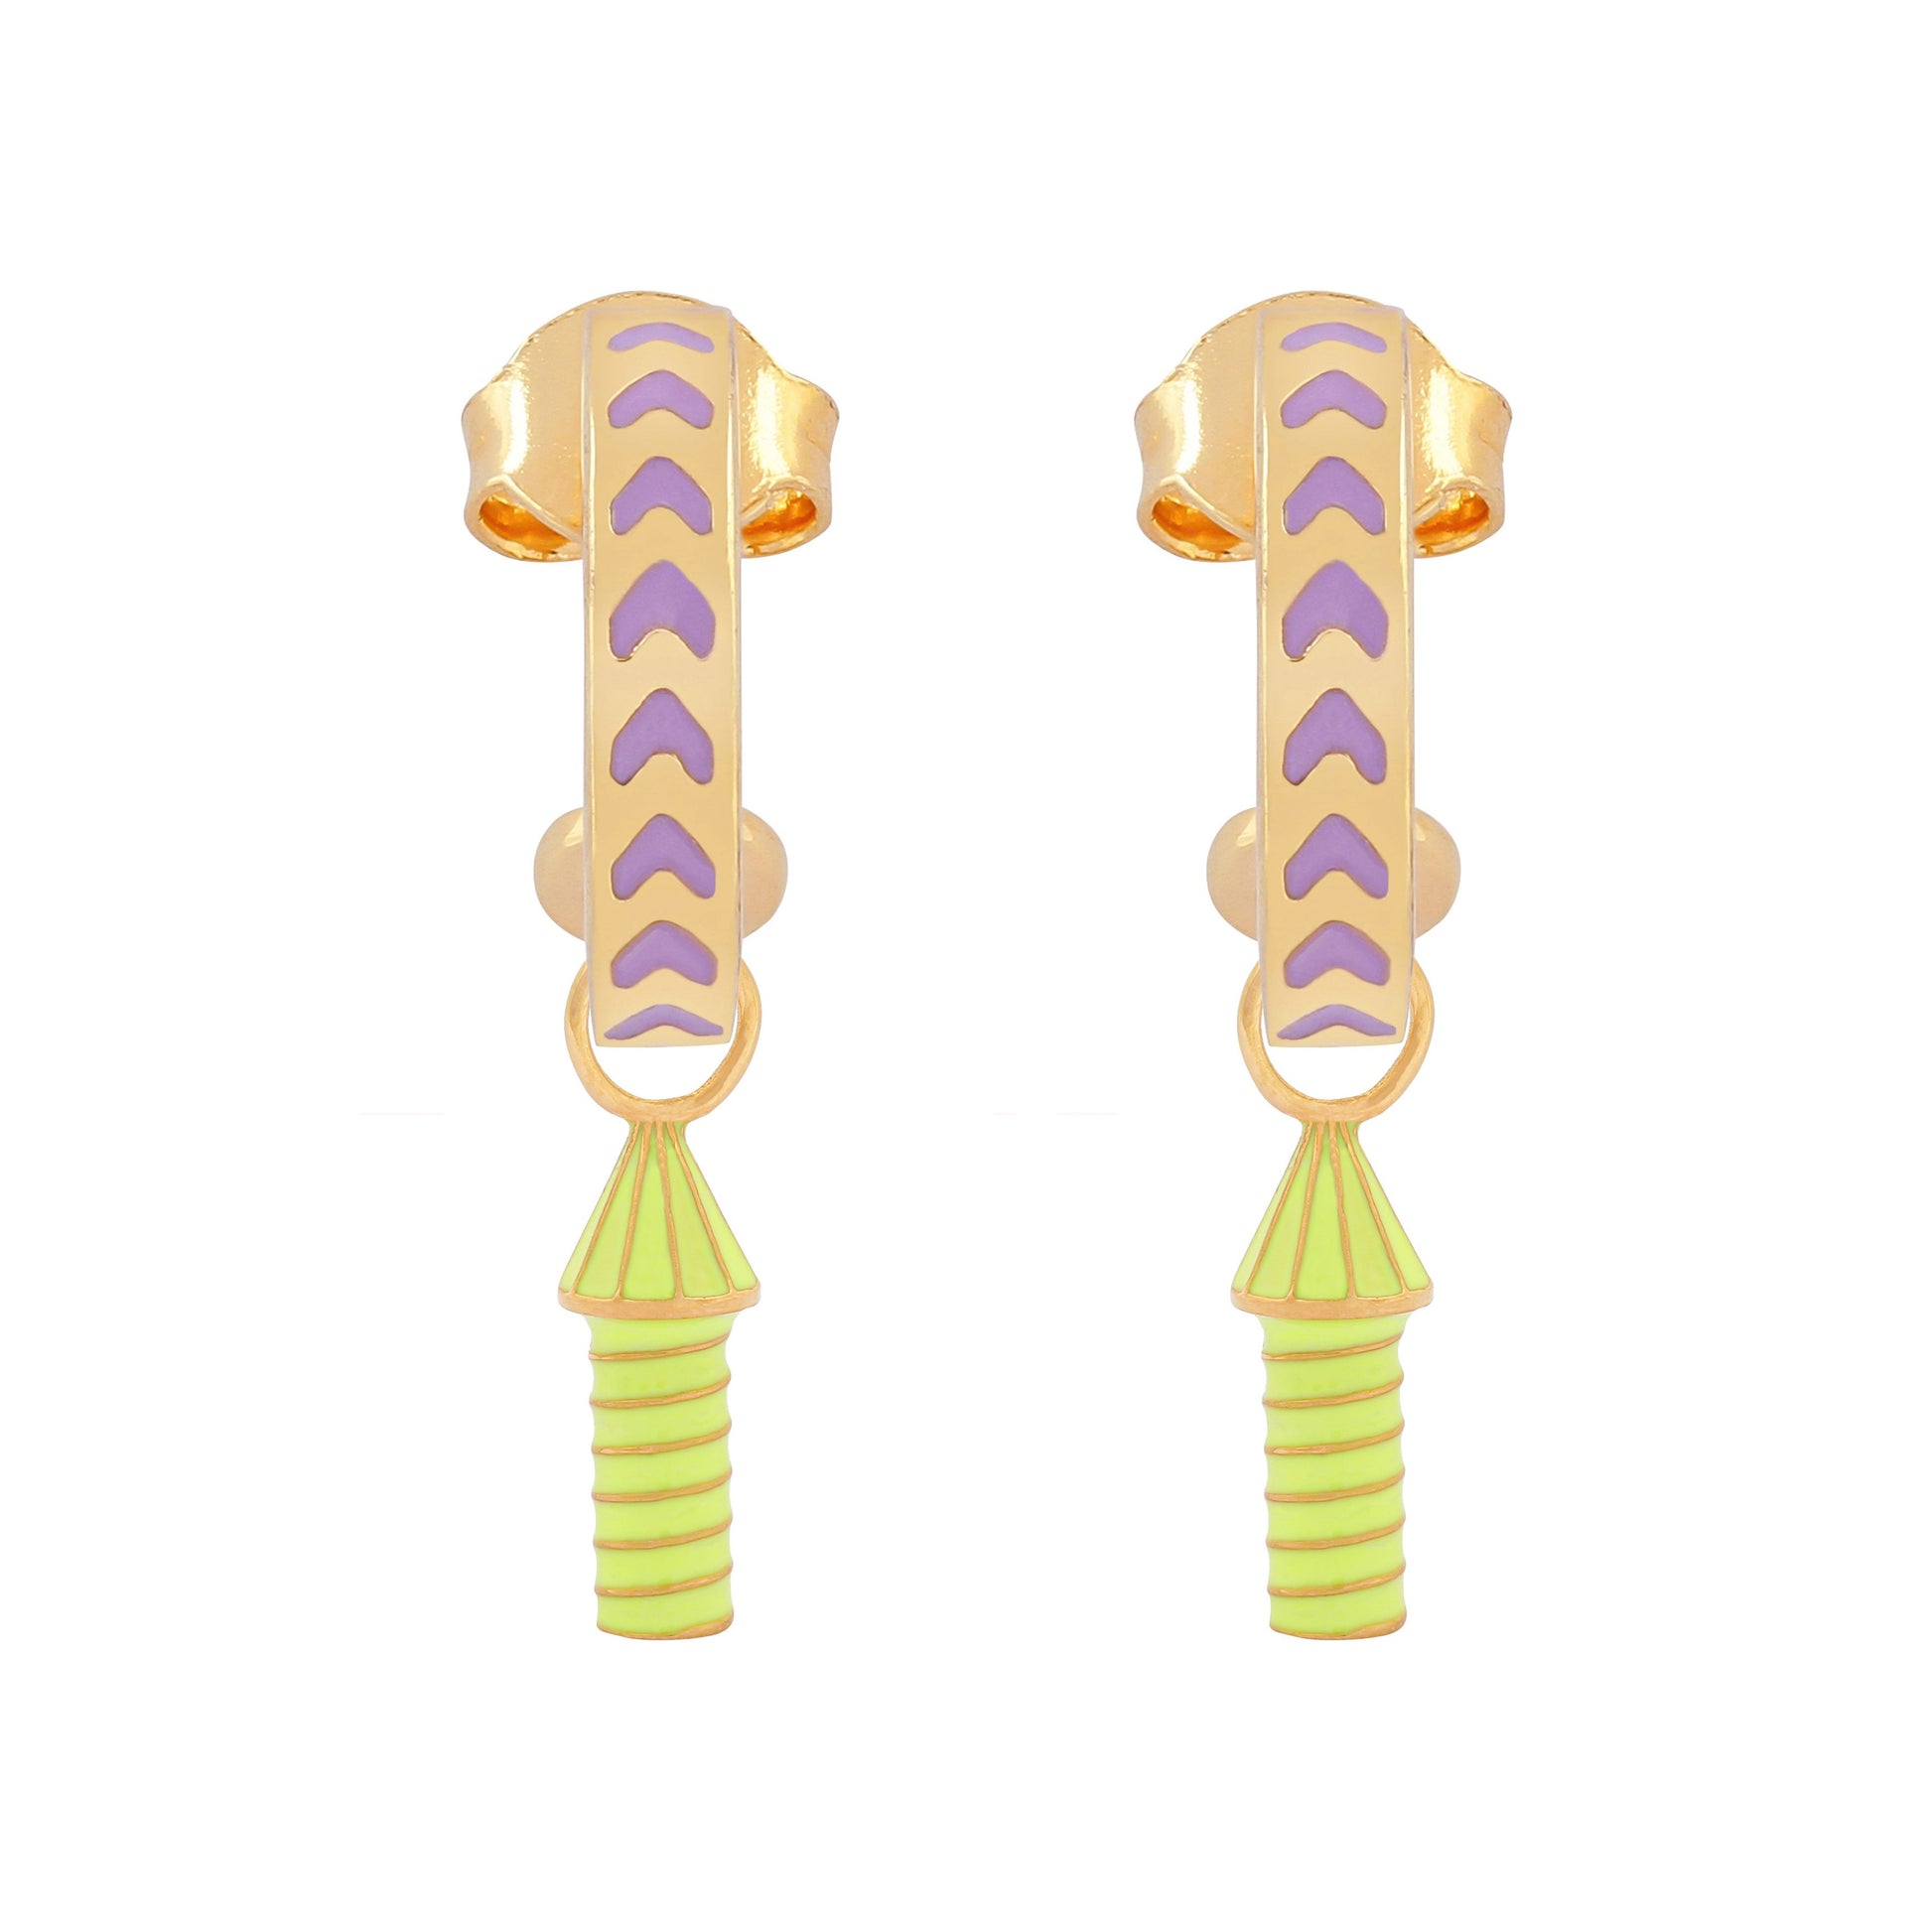 image of rocket enamel earrings in purple, neon yellow and gold on white background